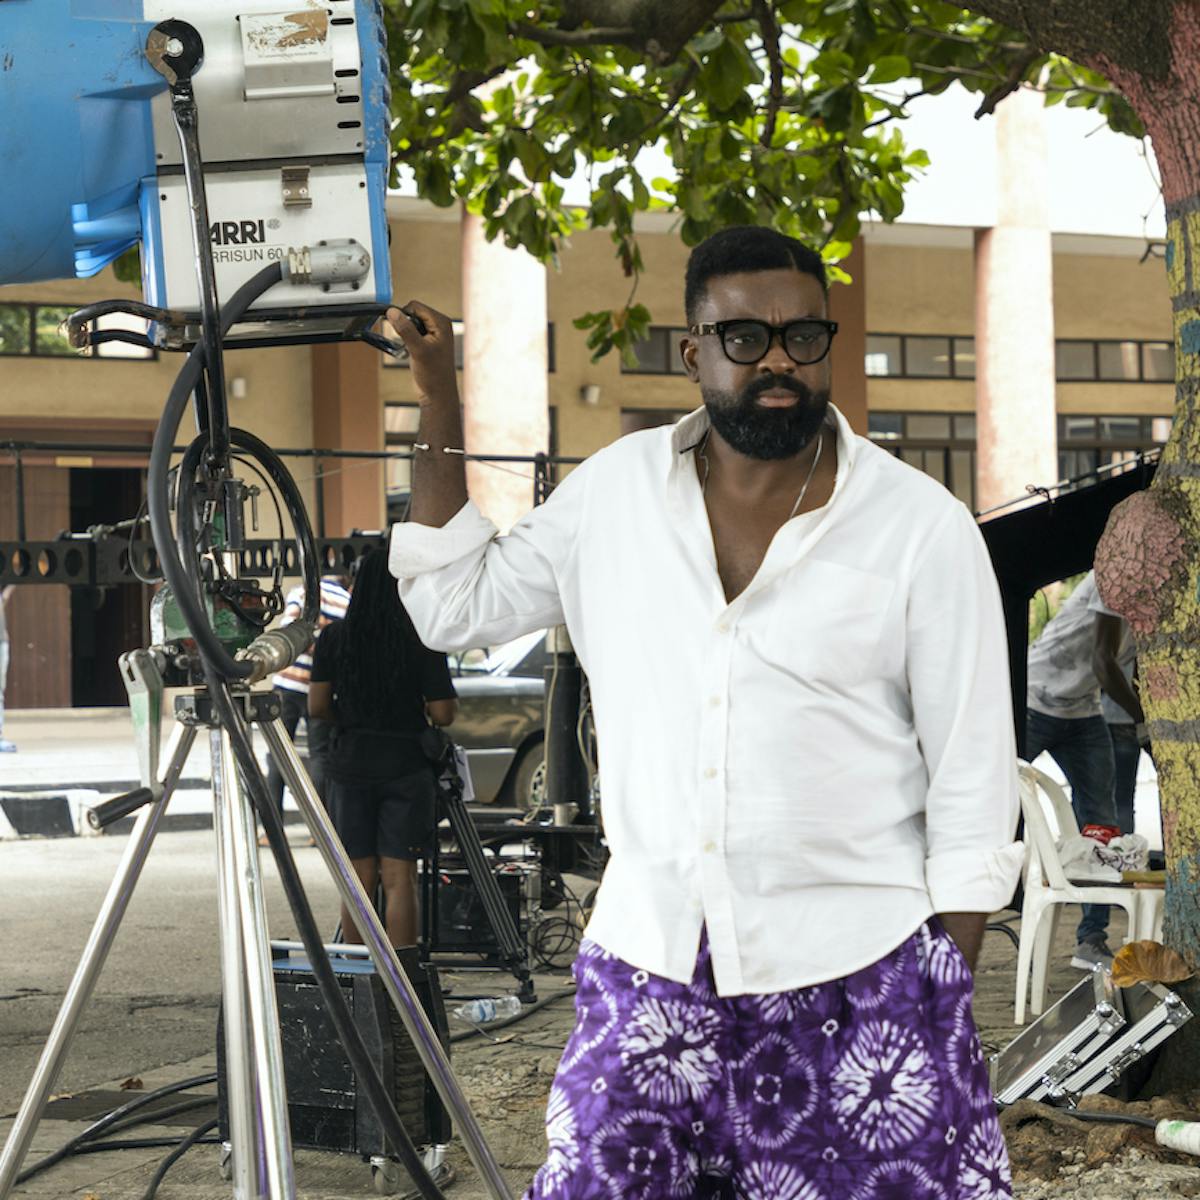 Kunle Afolayan wears a white shirt and purple patterned pants as he films outside. Behind him are masked crew members, equipment, and a leafy tree.